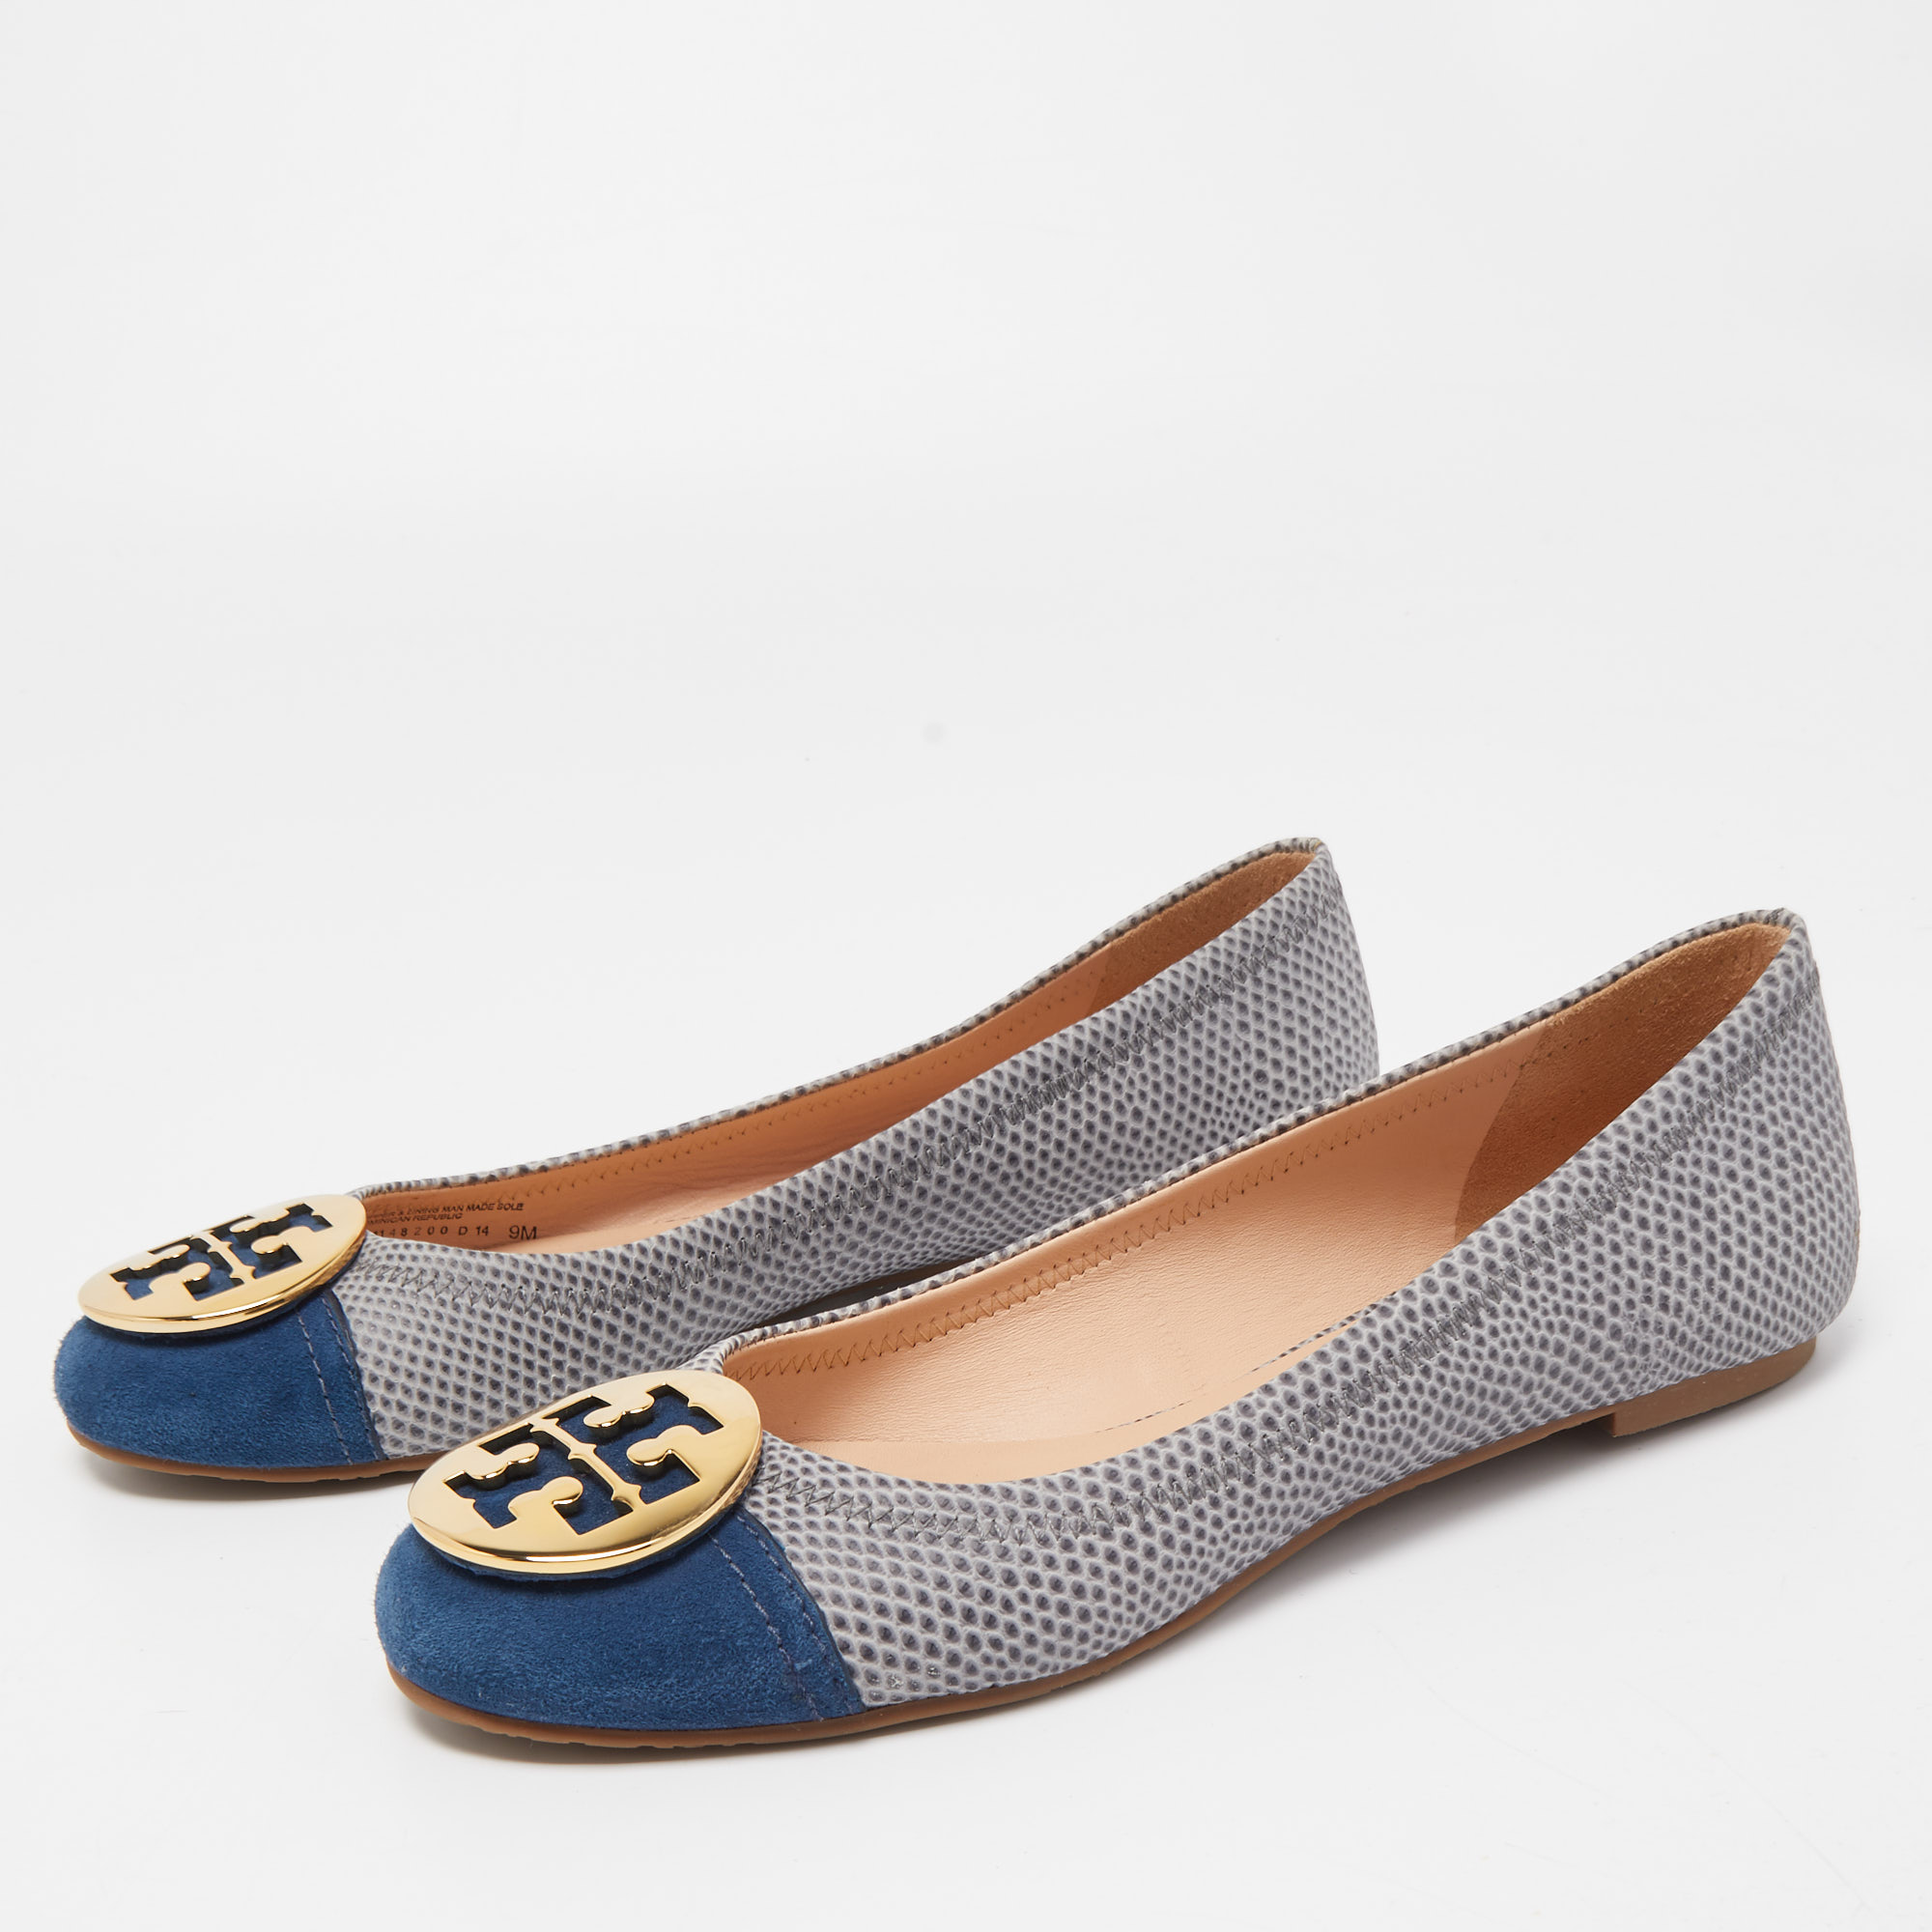 

Tory Burch Blue/Grey Textured Leather and Suede Reva Ballet Flats Size